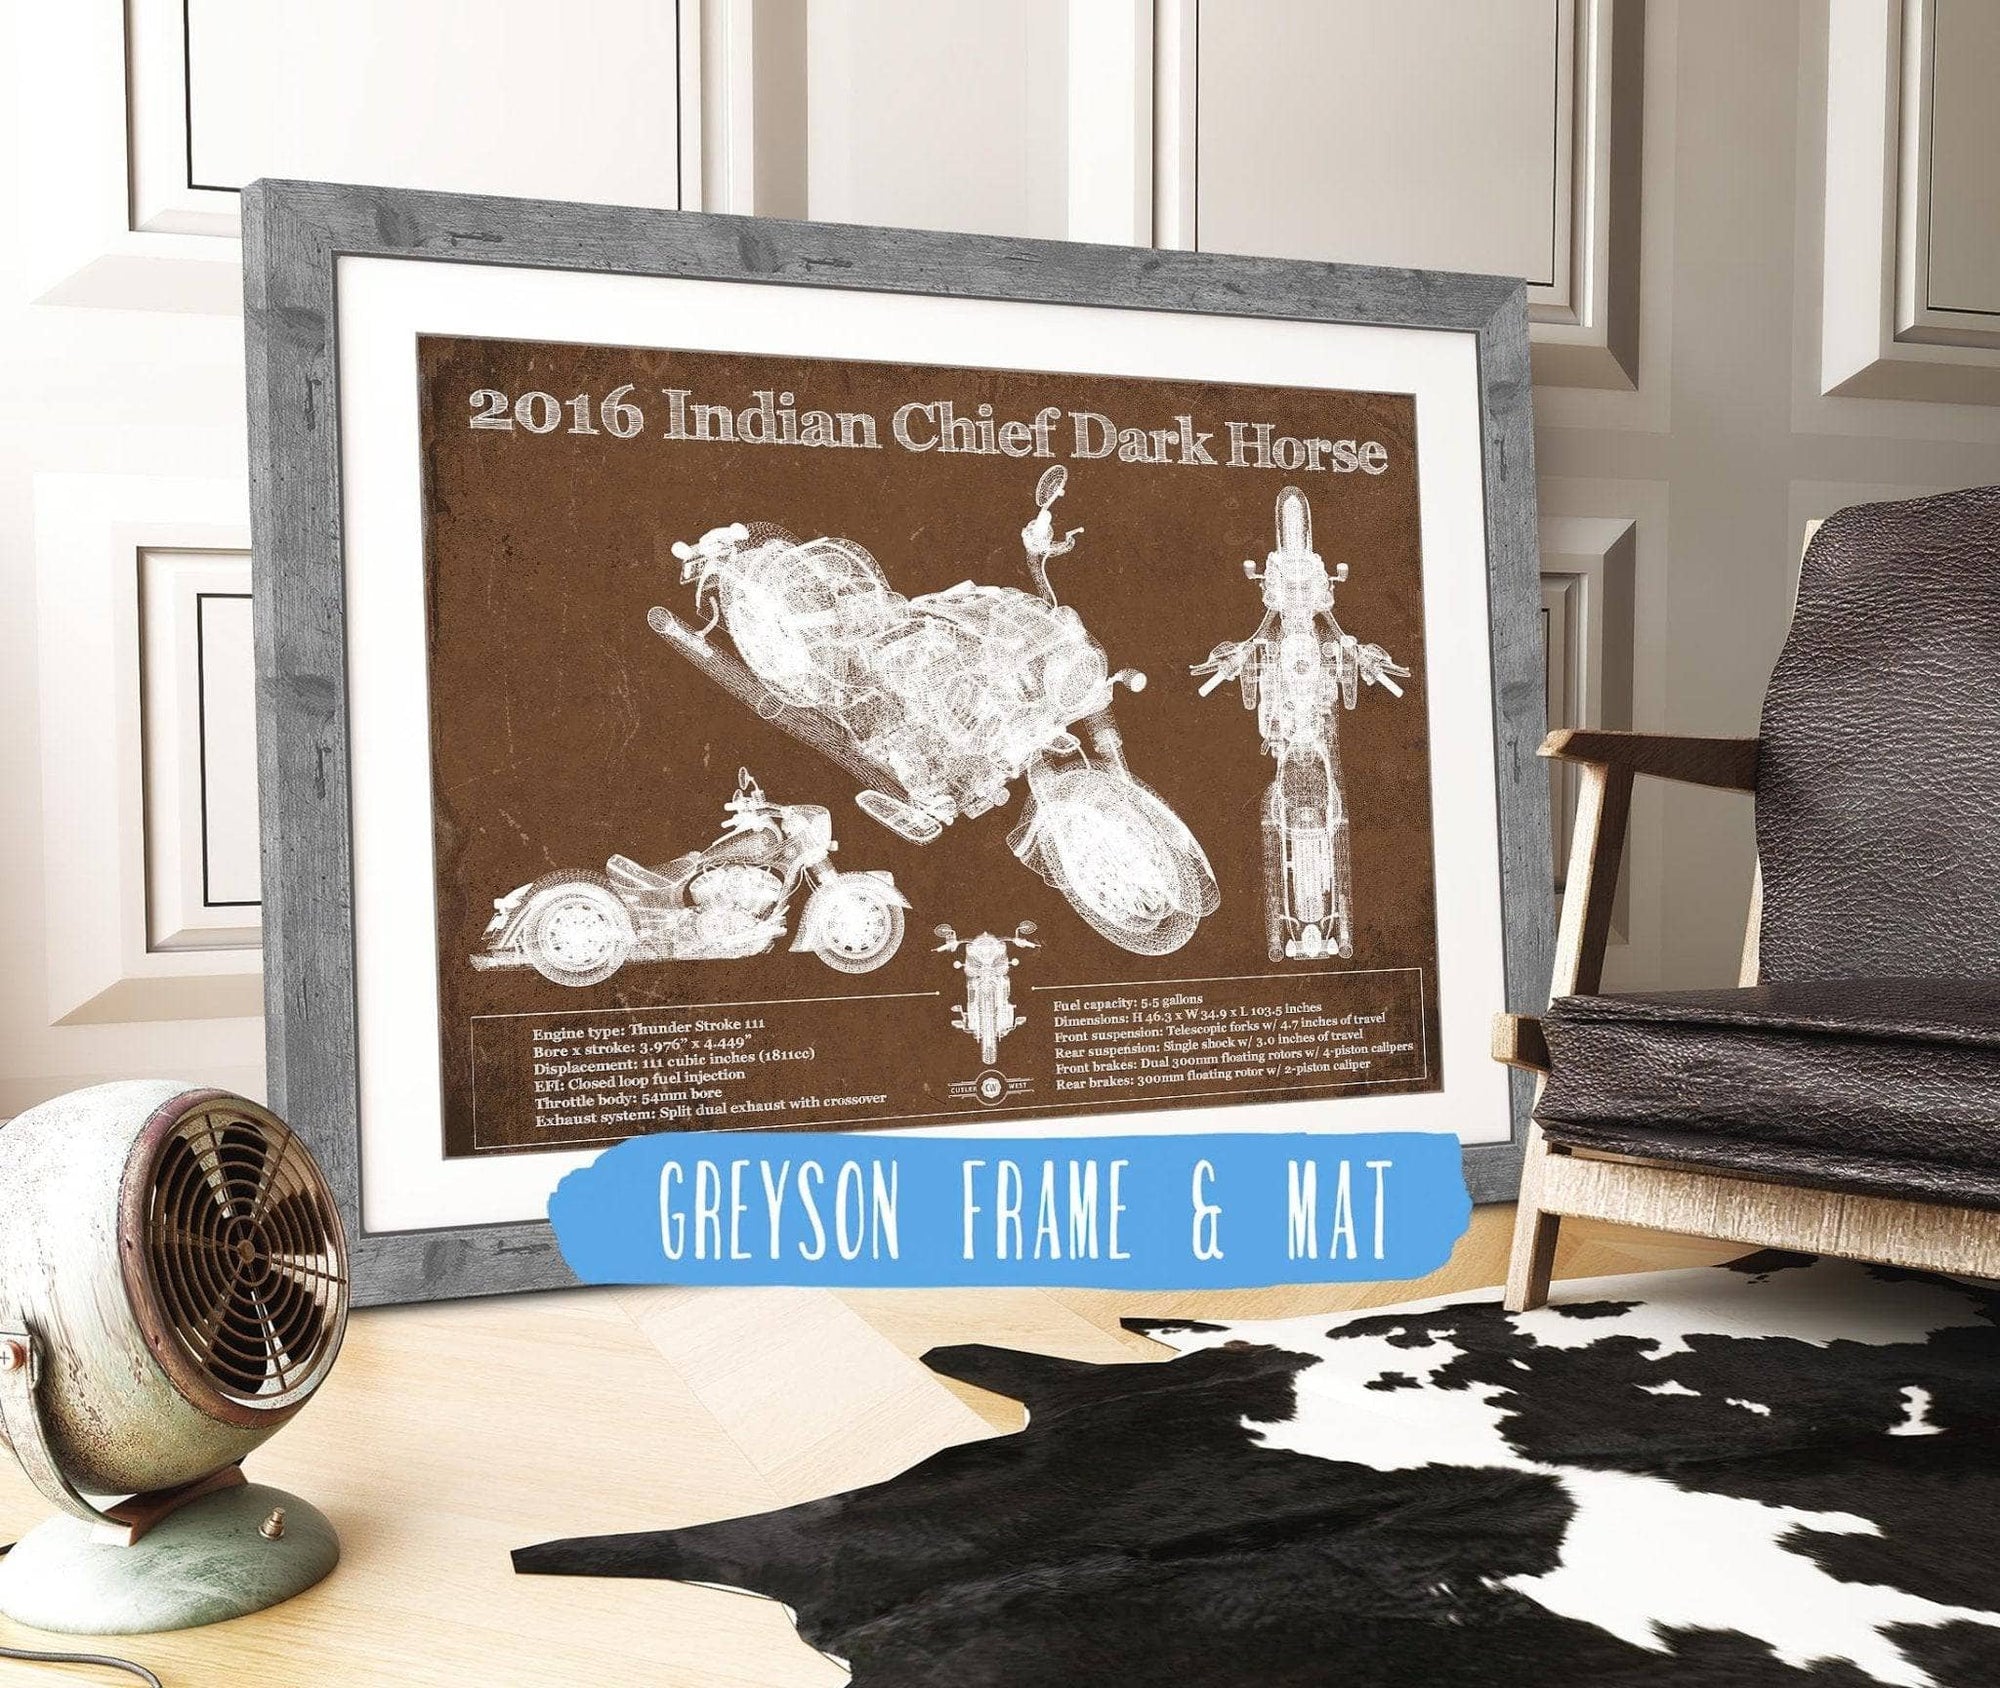 Cutler West 14" x 11" / Greyson Frame & Mat 2016-2019 Indian Chief Dark Horse Motorcycle Patent Print 933311134_40165